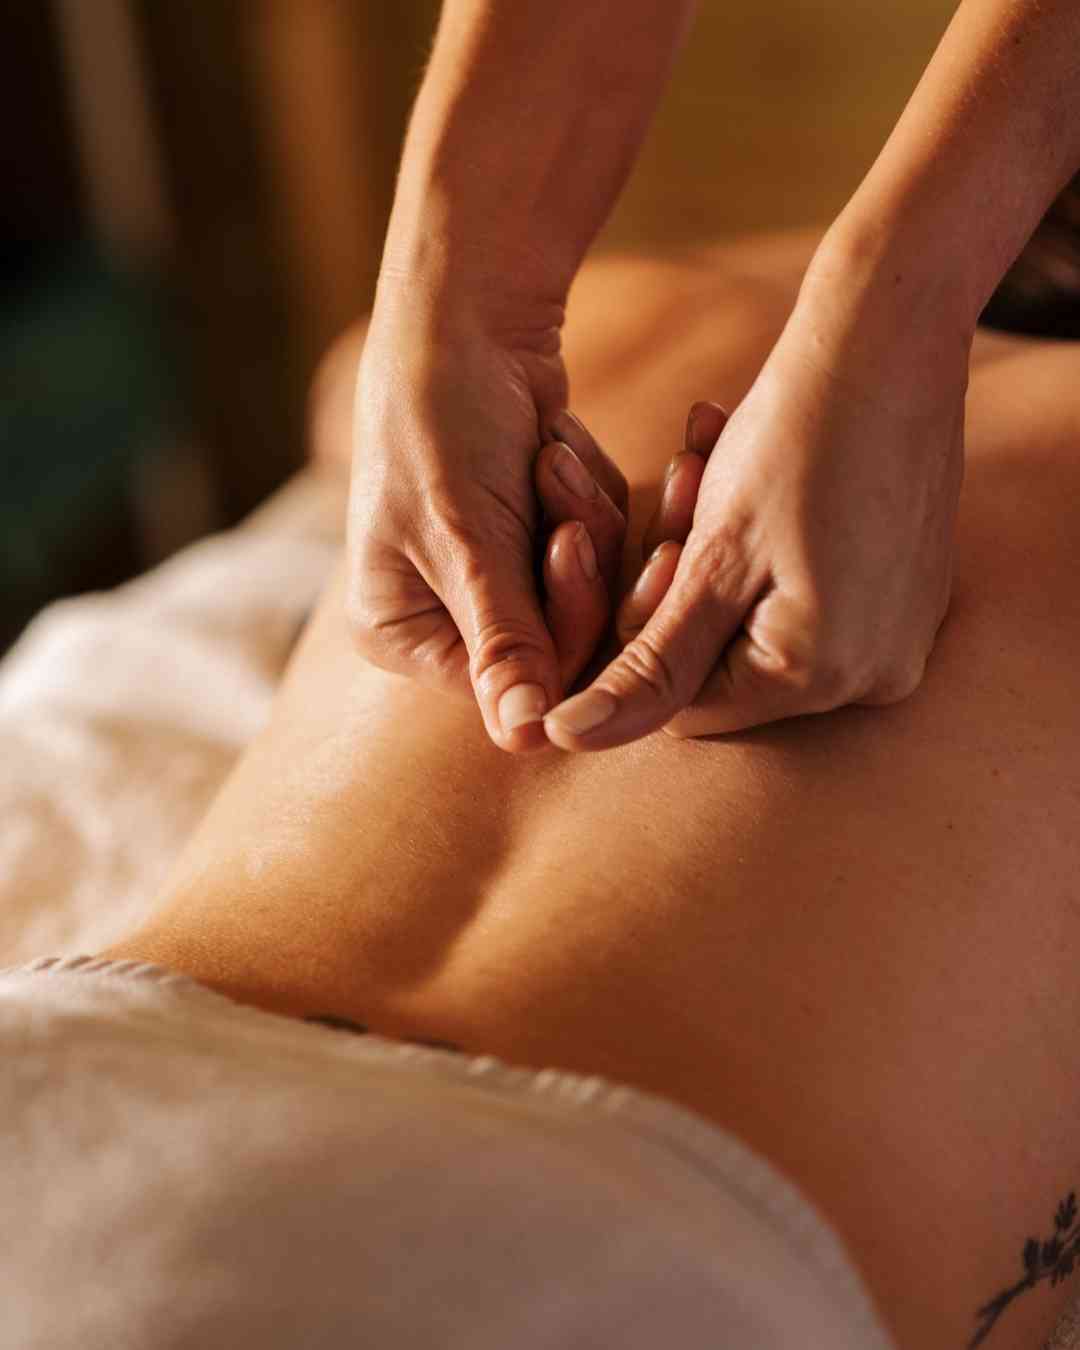 Tantric Massage Near Me What is a tantra massage? Here's what happens.